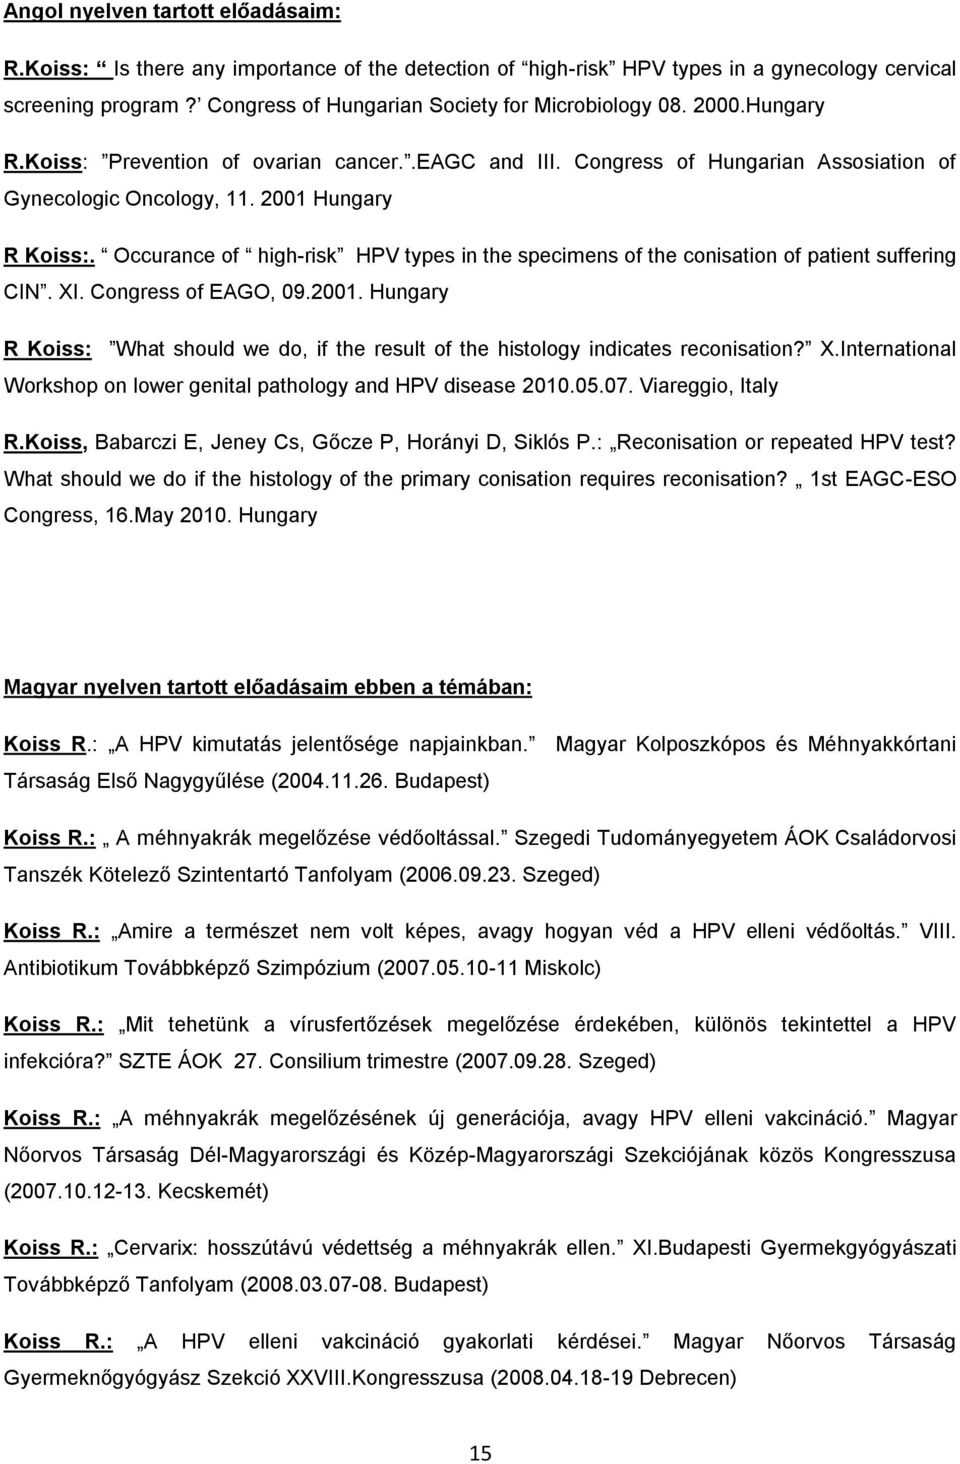 2001 Hungary R Koiss:. Occurance of high-risk HPV types in the specimens of the conisation of patient suffering CIN. XI. Congress of EAGO, 09.2001. Hungary R Koiss: What should we do, if the result of the histology indicates reconisation?